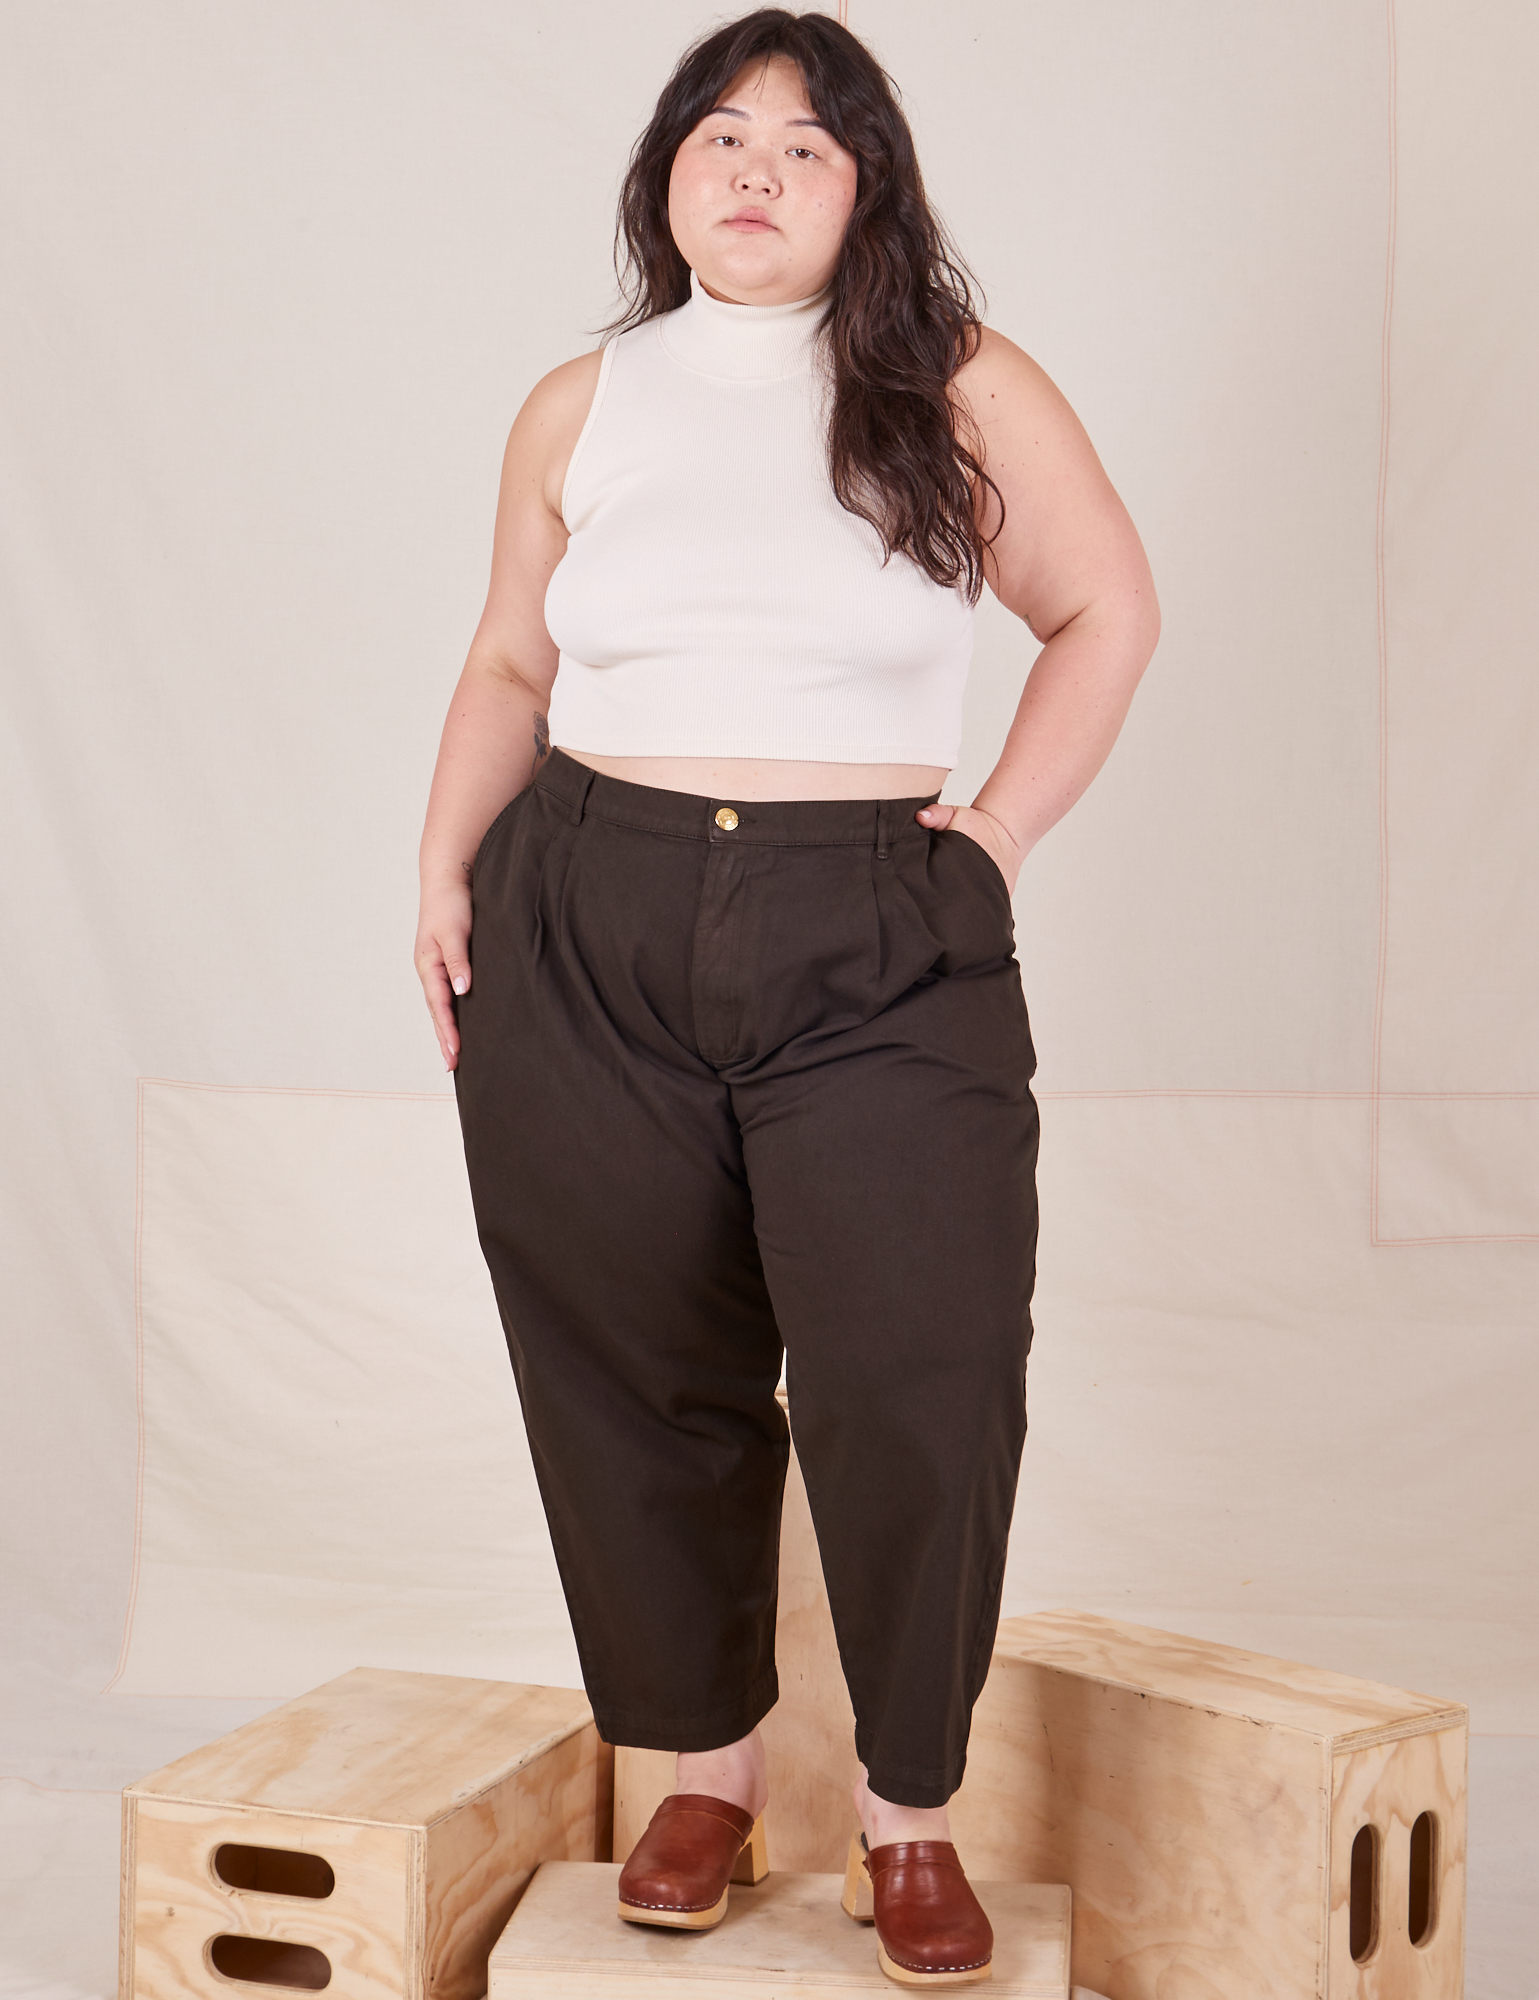 Ashley is 5&#39;7&quot; and wearing 1XL Petite Heavyweight Trousers in Espresso Brown paired with vintage off-white Sleeveless Turtleneck